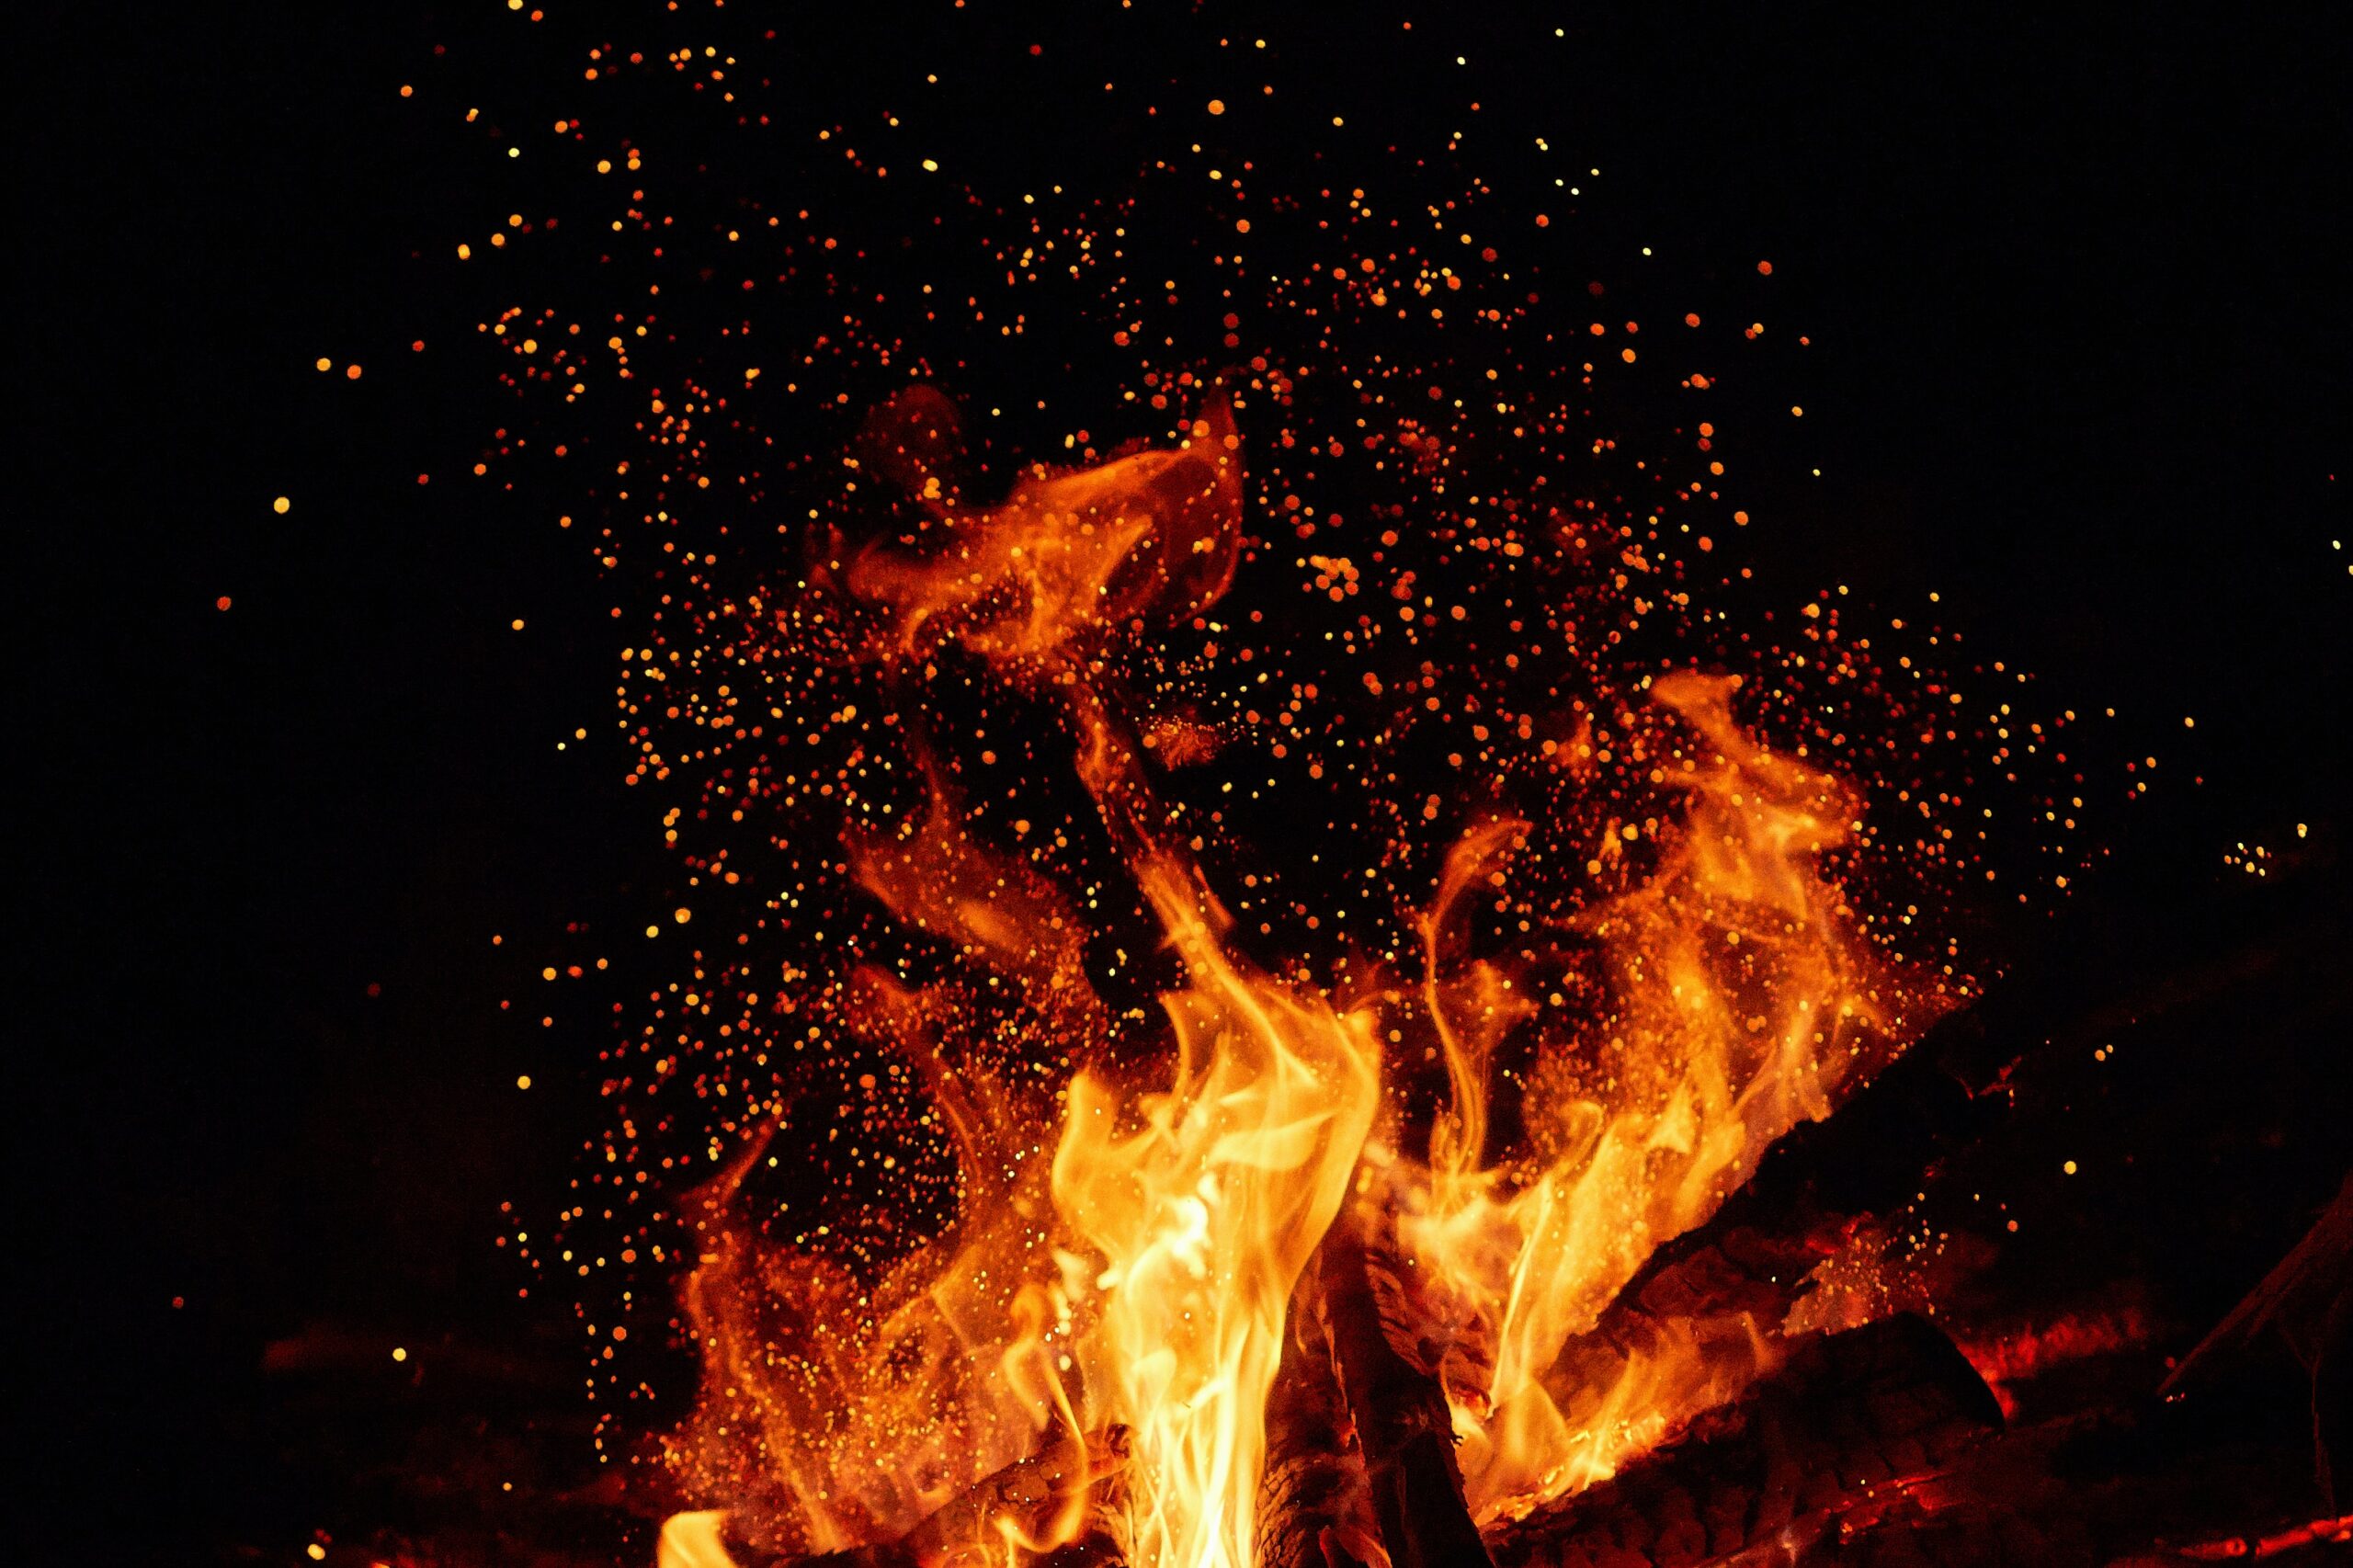 close up of bonfire flames with orange sparks flying in the air against black background